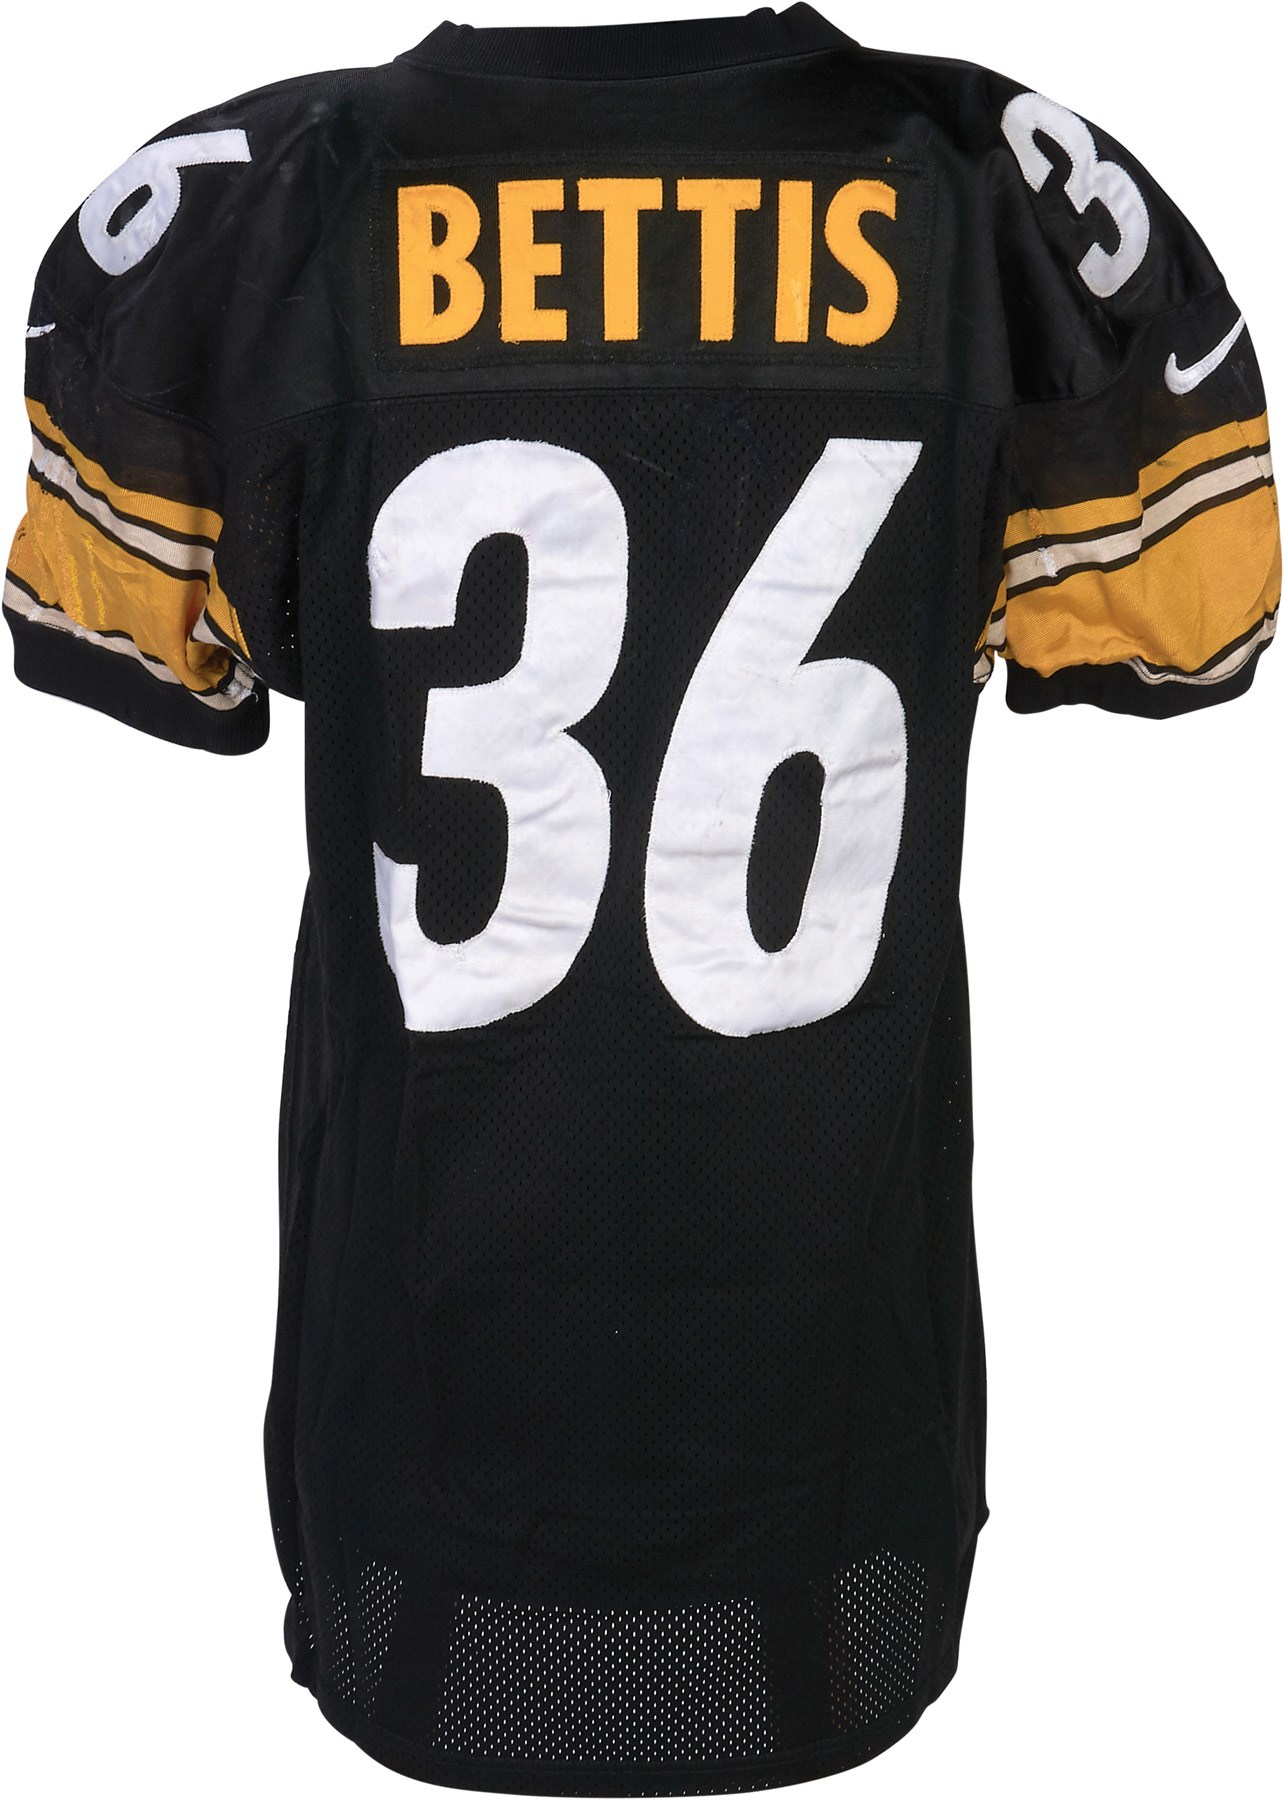 1997 Season Jerome Bettis Pittsburgh Steelers Game Worn Jersey - 646yds & 3TD's (Photo-Matched to 6 Games)